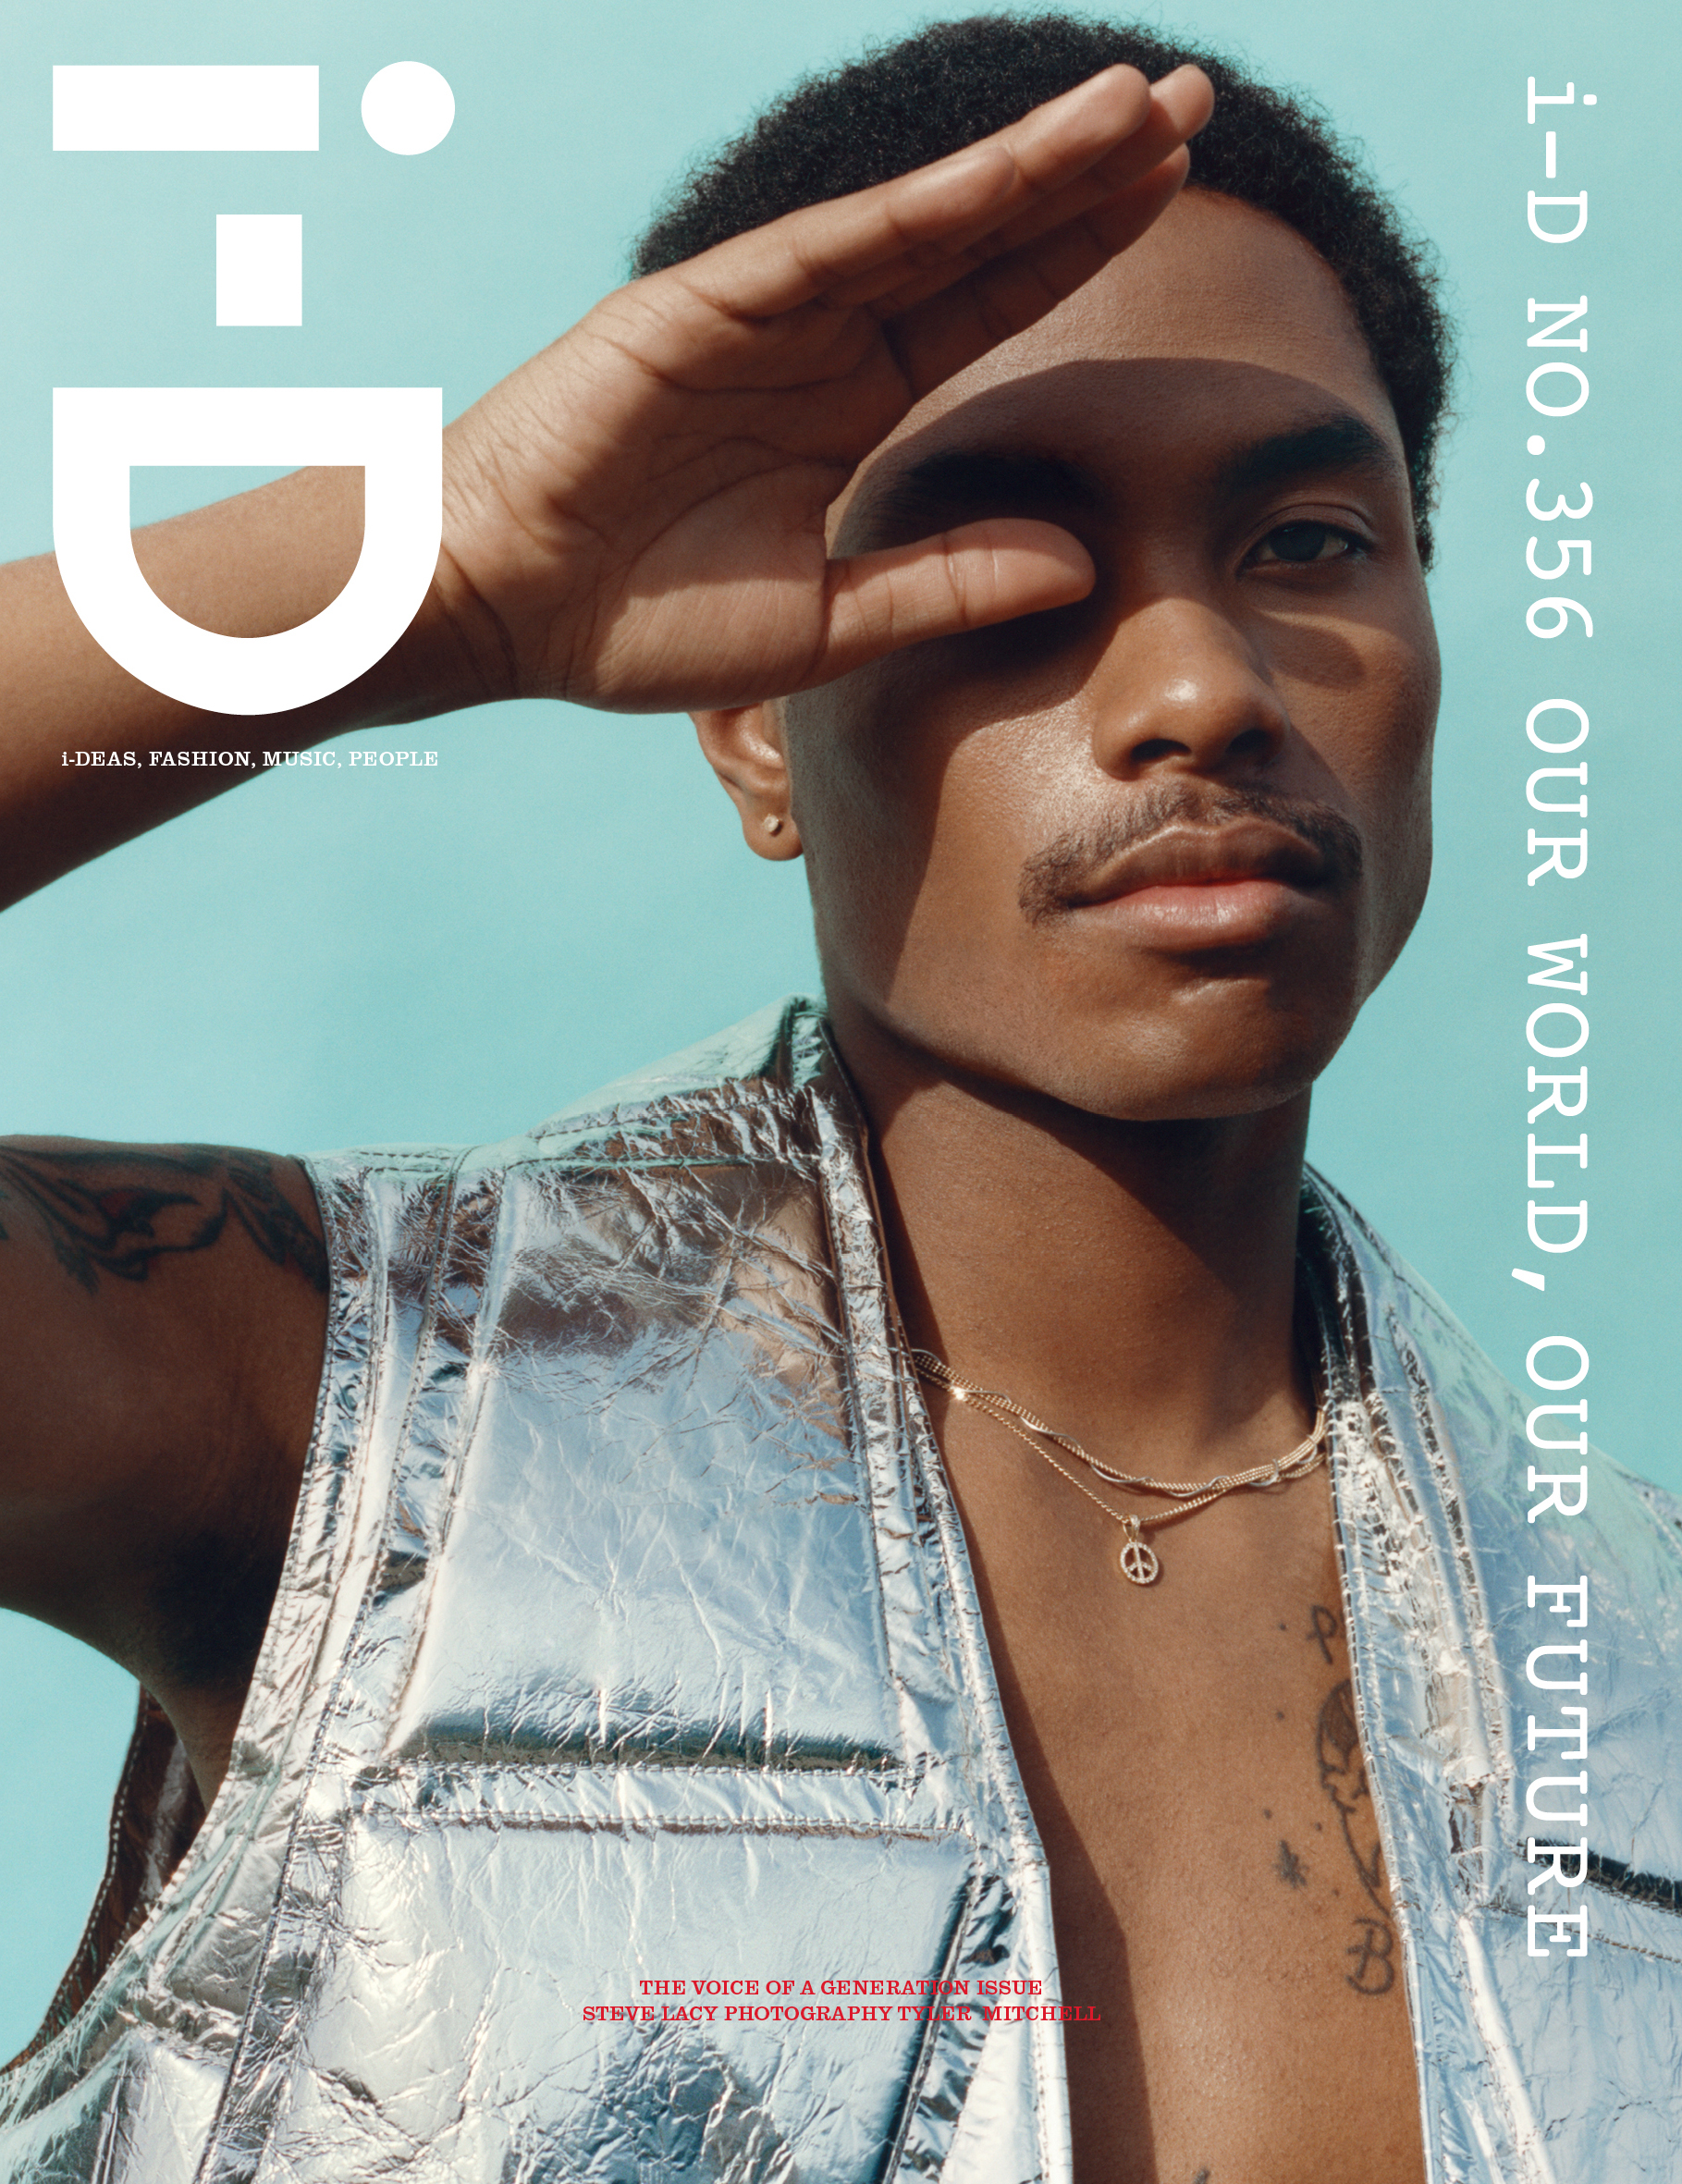 Steve Lacy discusses his debut album, life and love iD